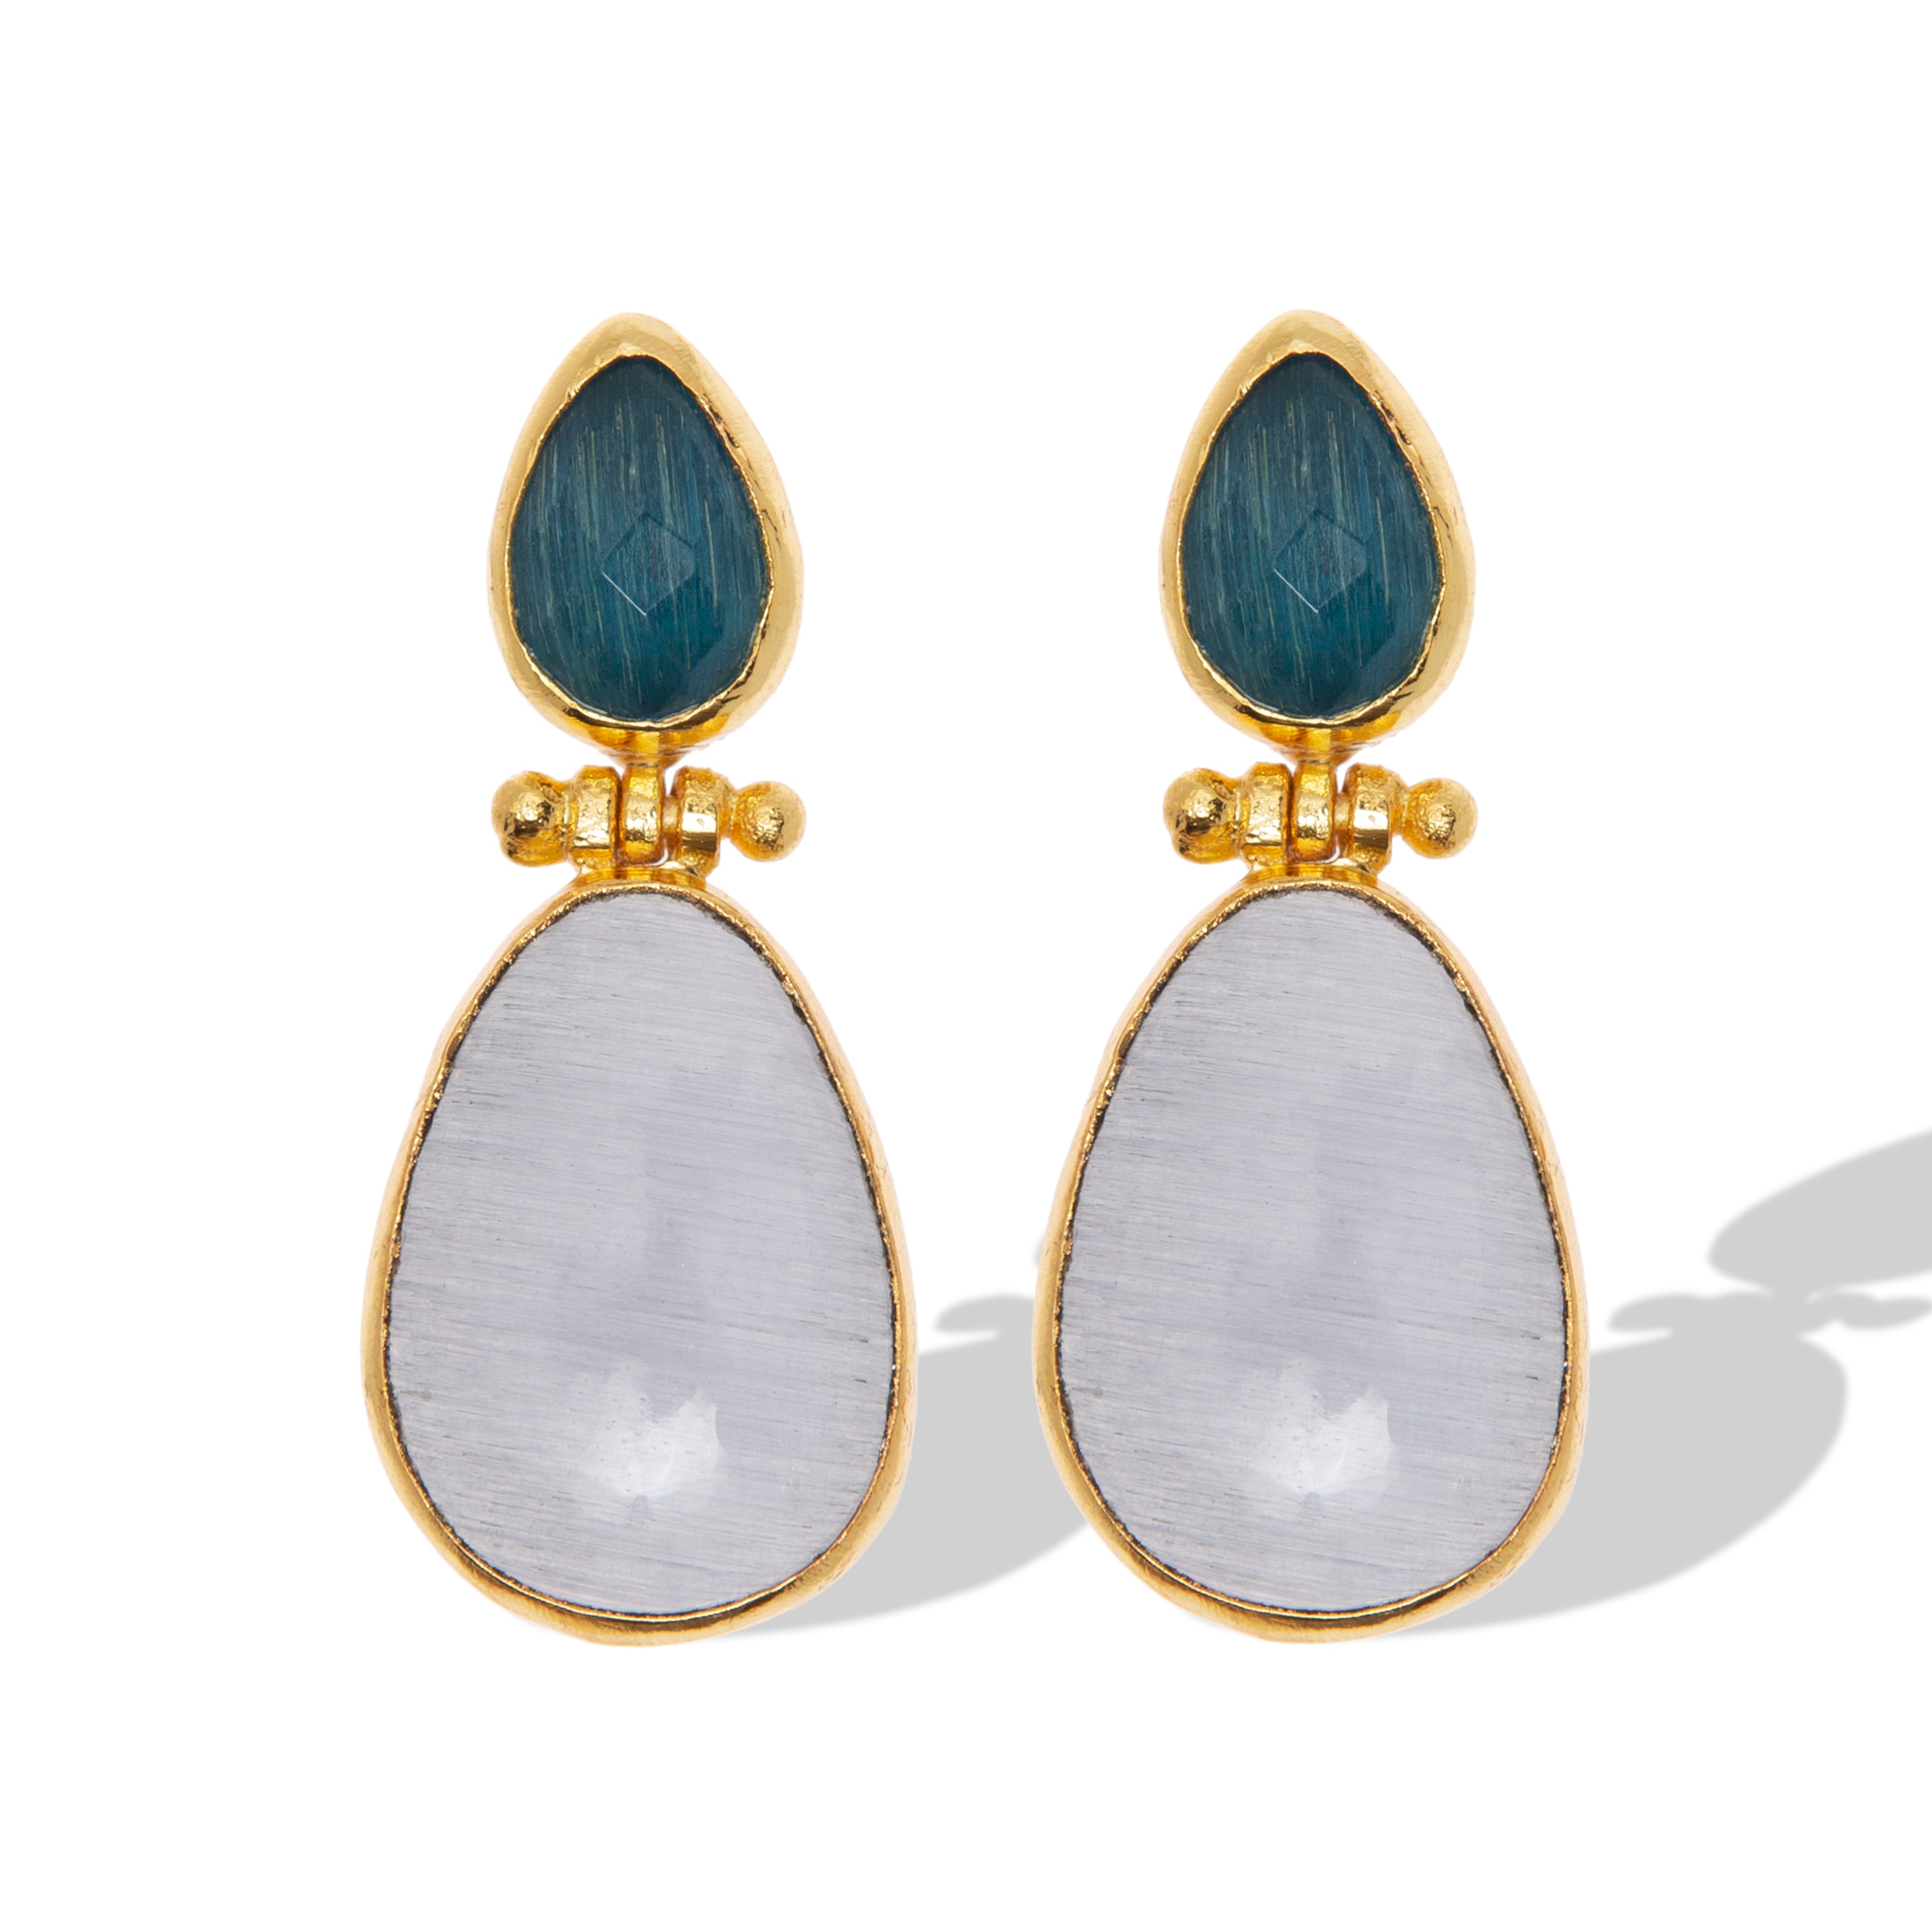 Double natural stone earrings